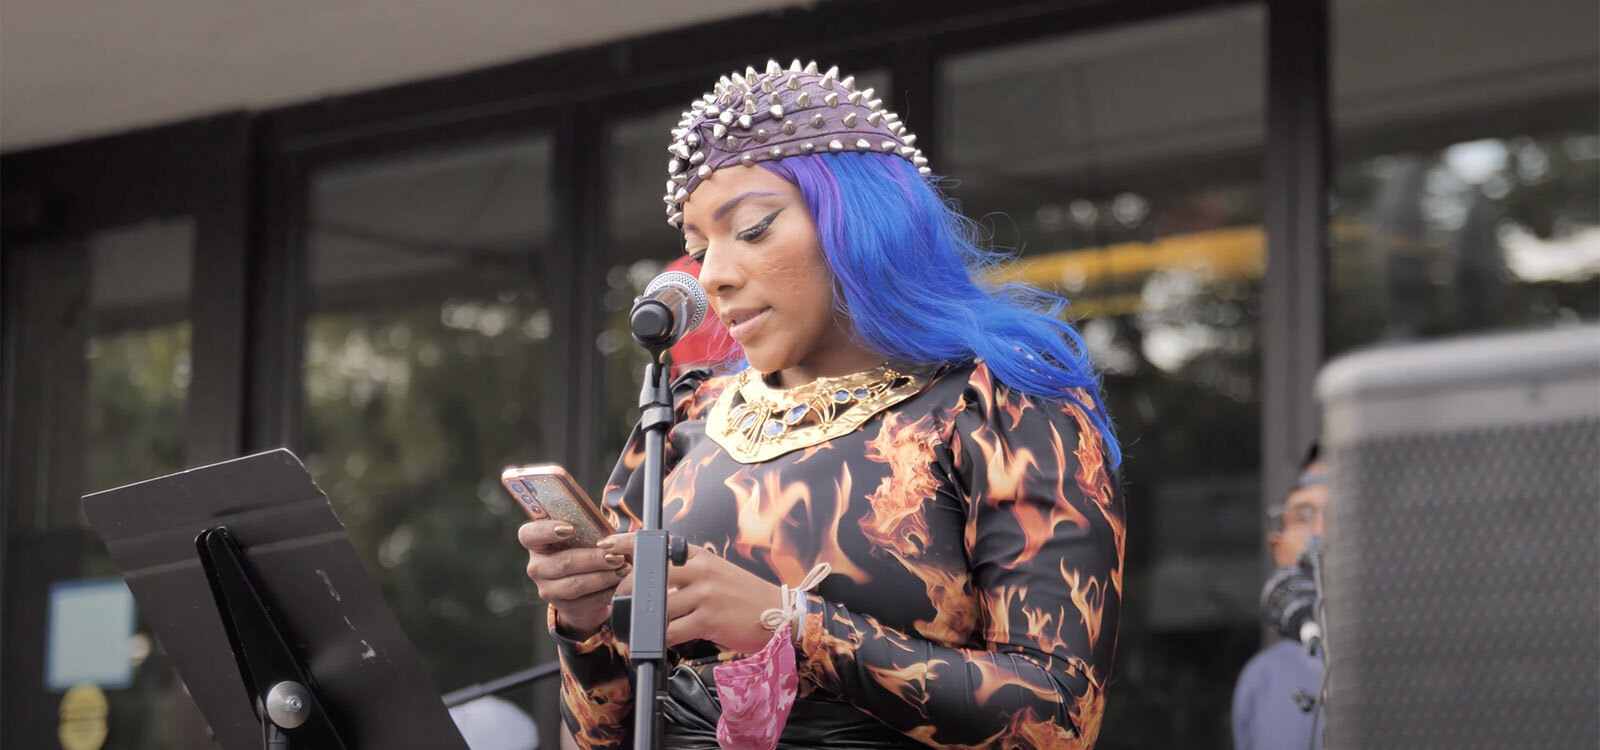 Video still of artist Abigail DeVille, with blue and purple hair, a large gold necklace, and a dress covered in flames, standing in front of a microphone in the Hirshhorn Museum’s sculpture garden